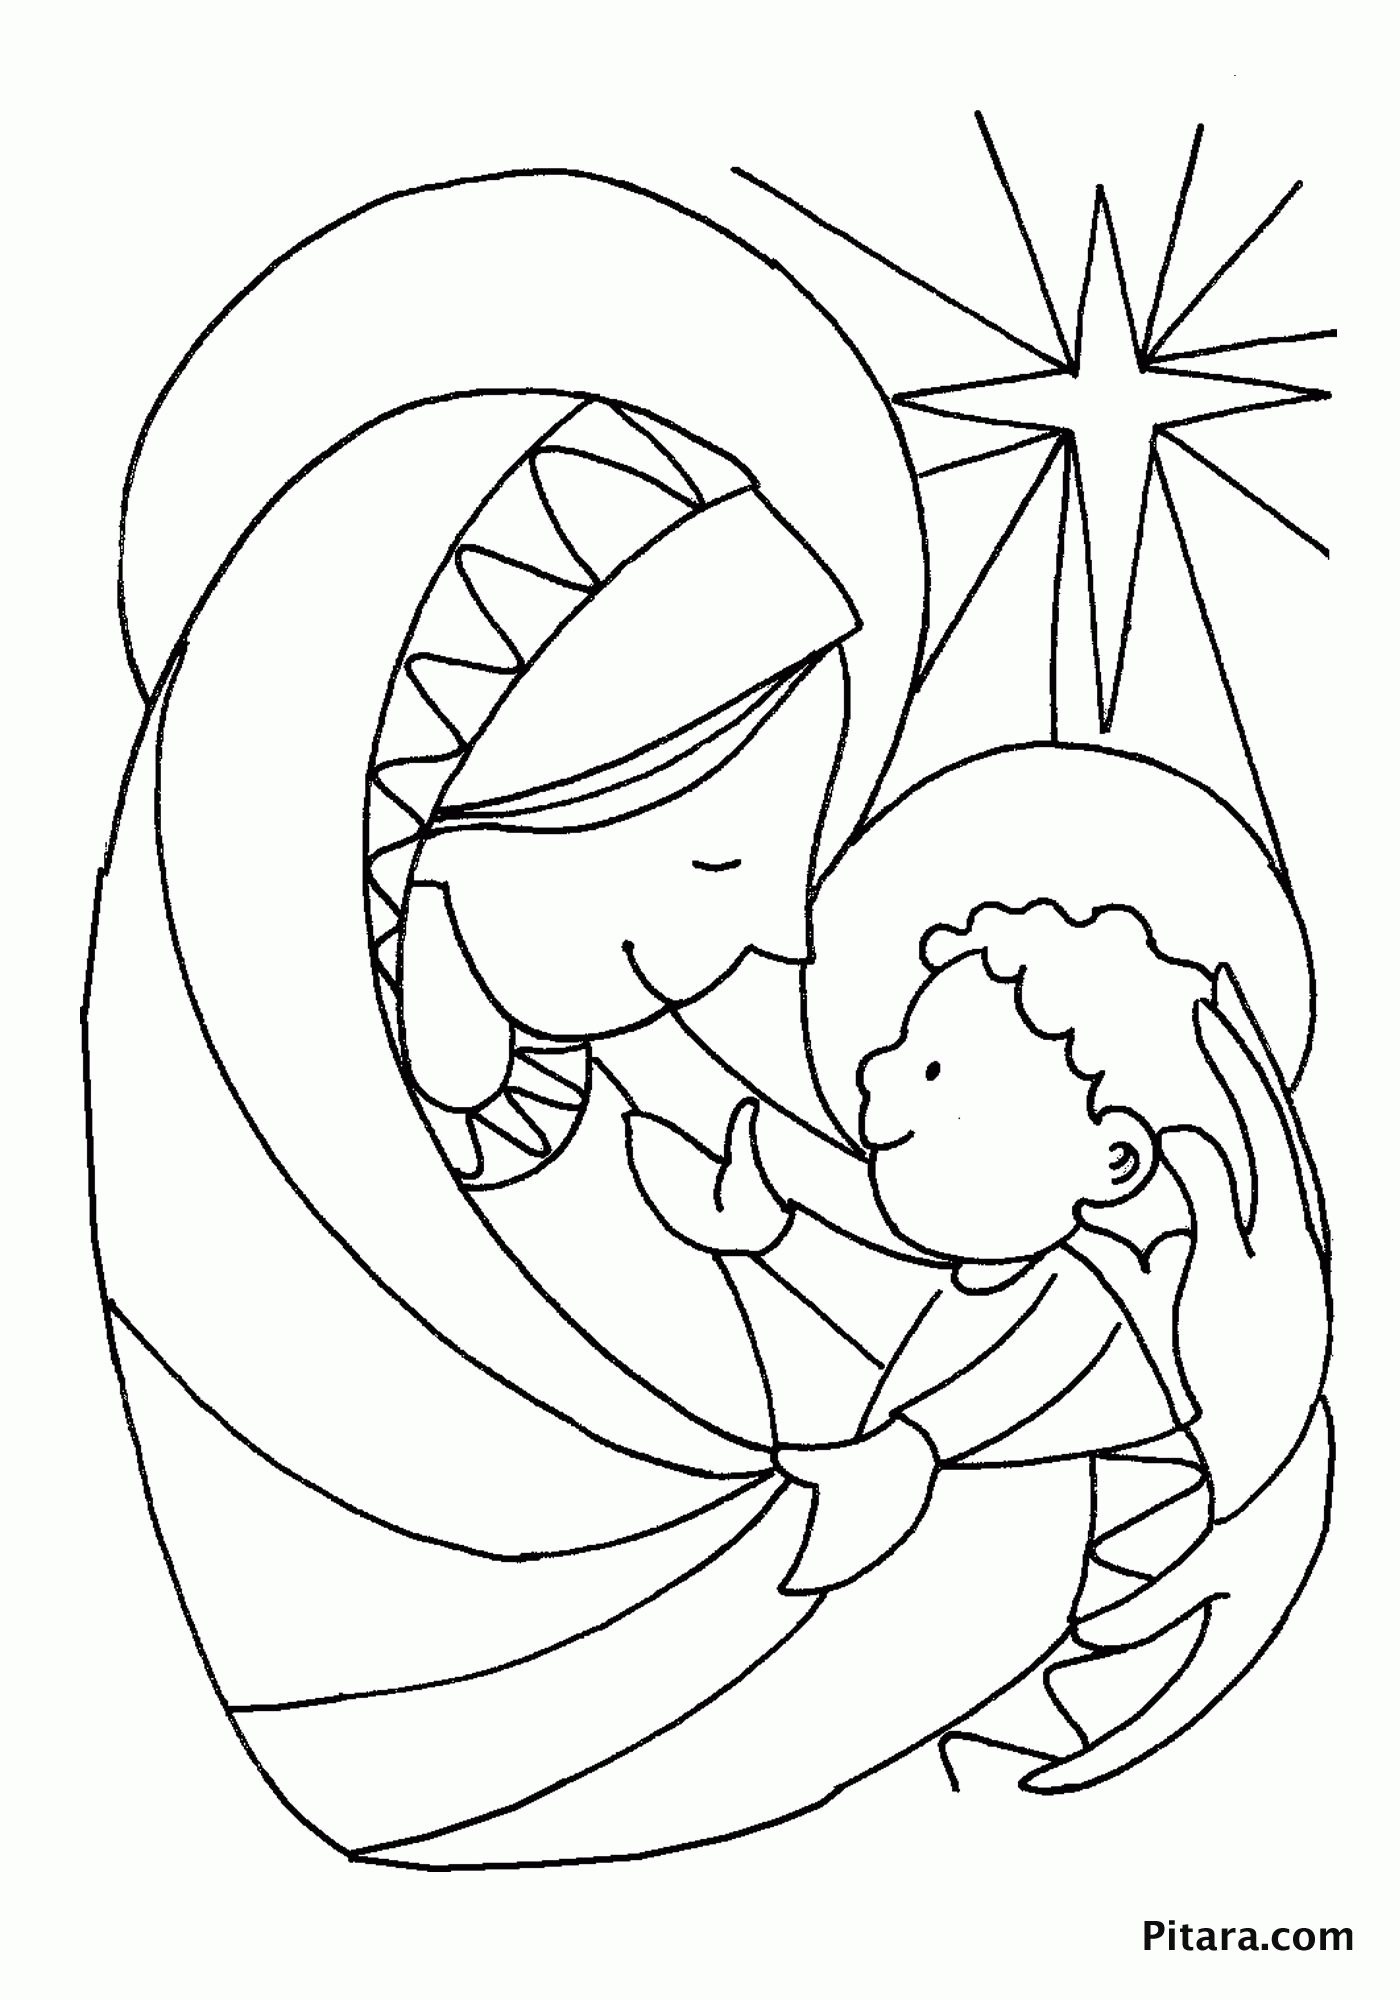 Jesus Coloring Pages For Kids Nice best online free - Coloring pages